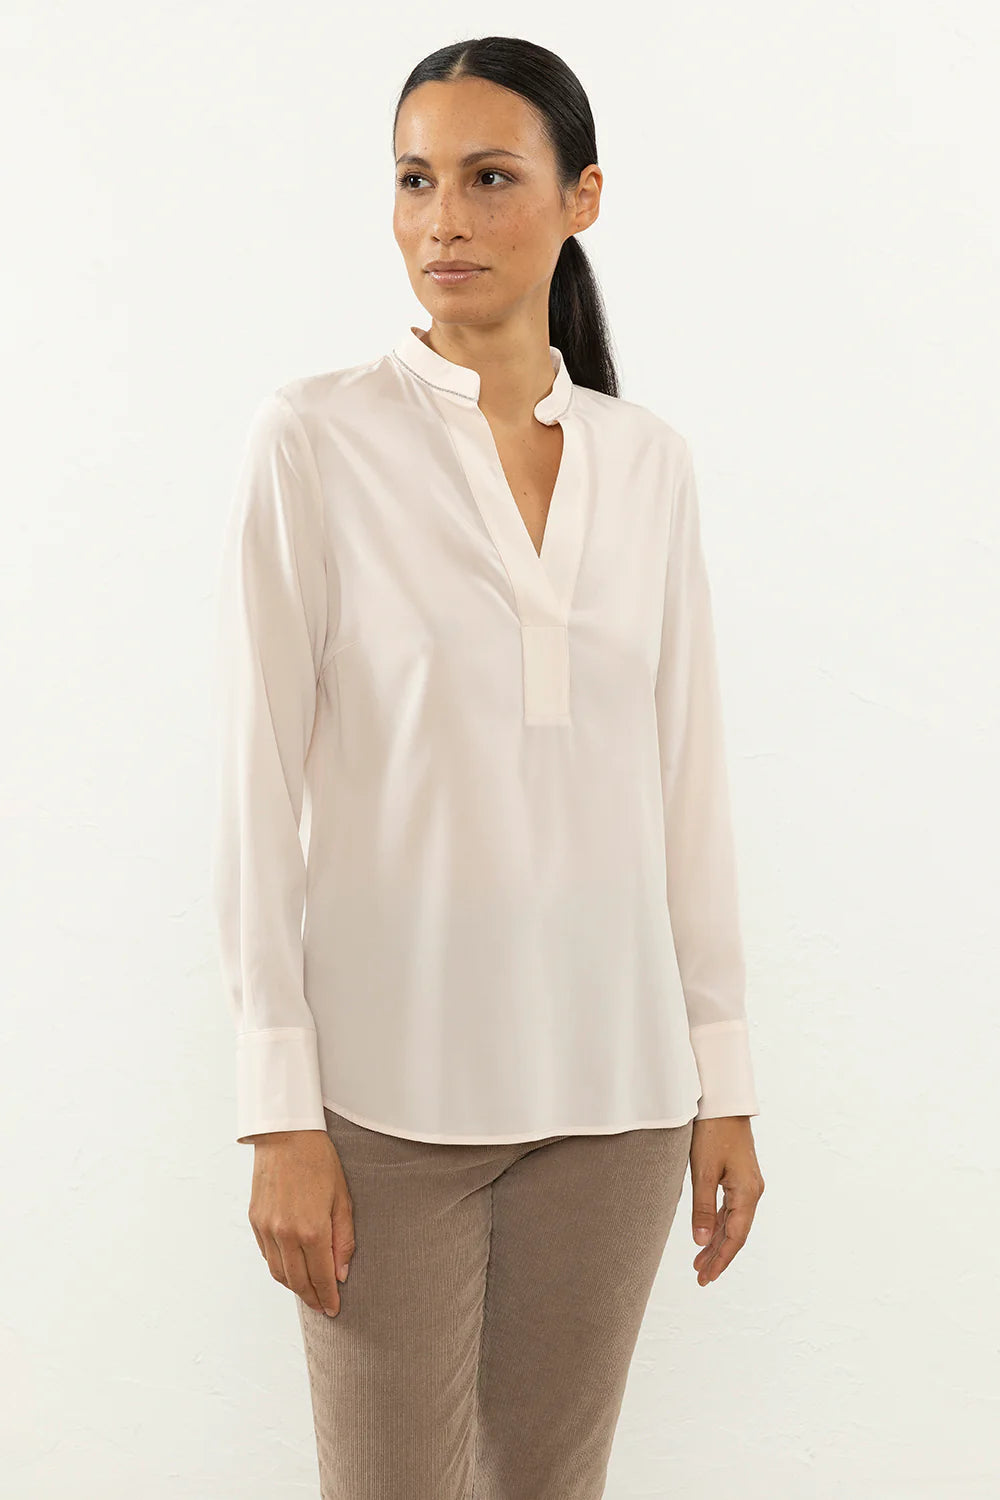 V-neck Shirt in Crepe de Chine - More Colors Available